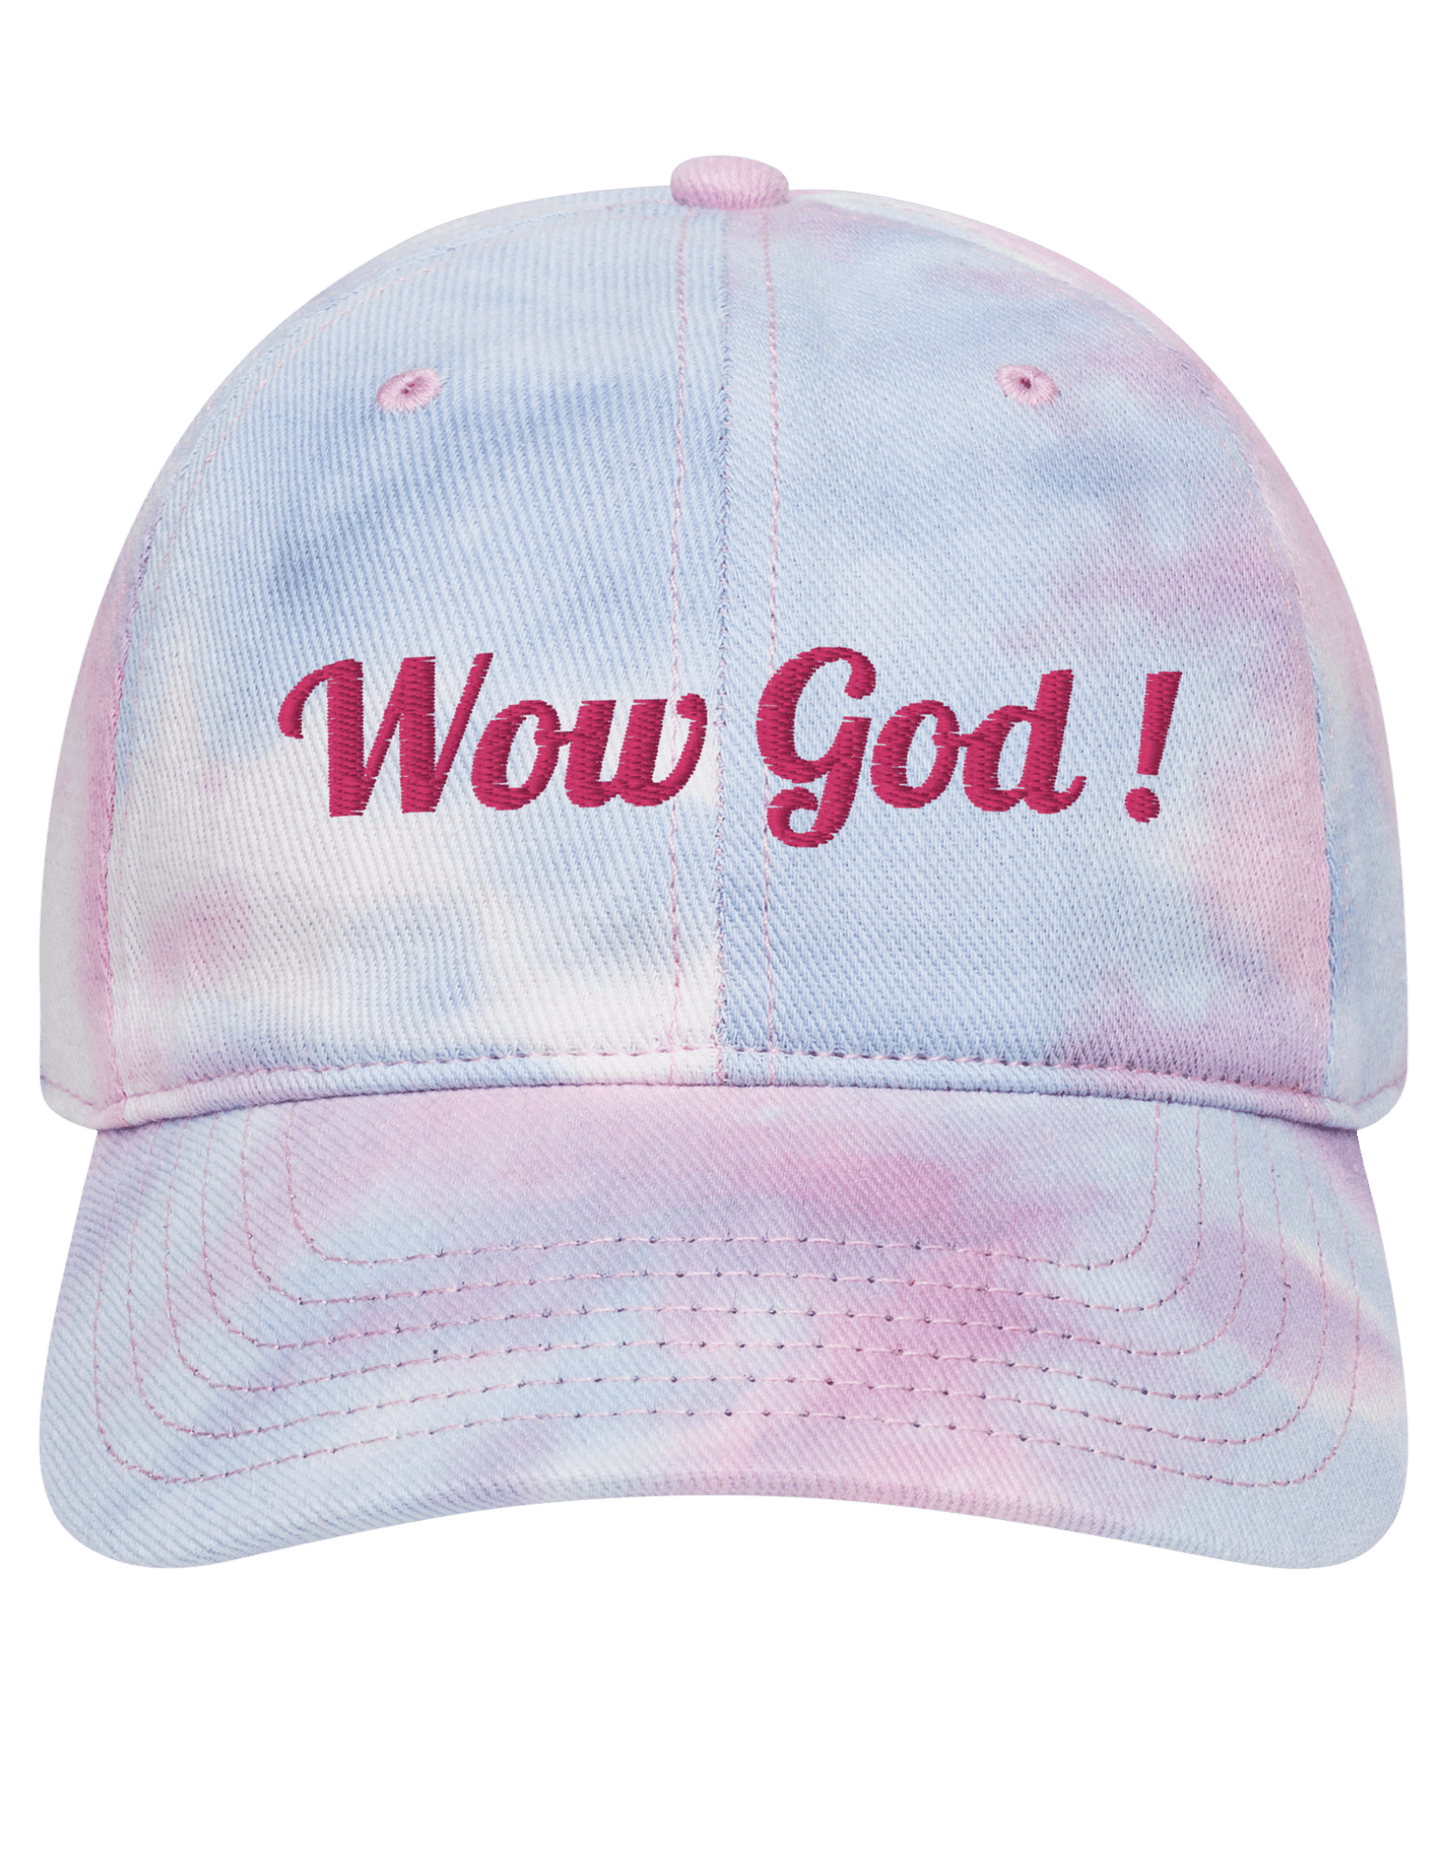 Wow God !® Cotton Candy Hat